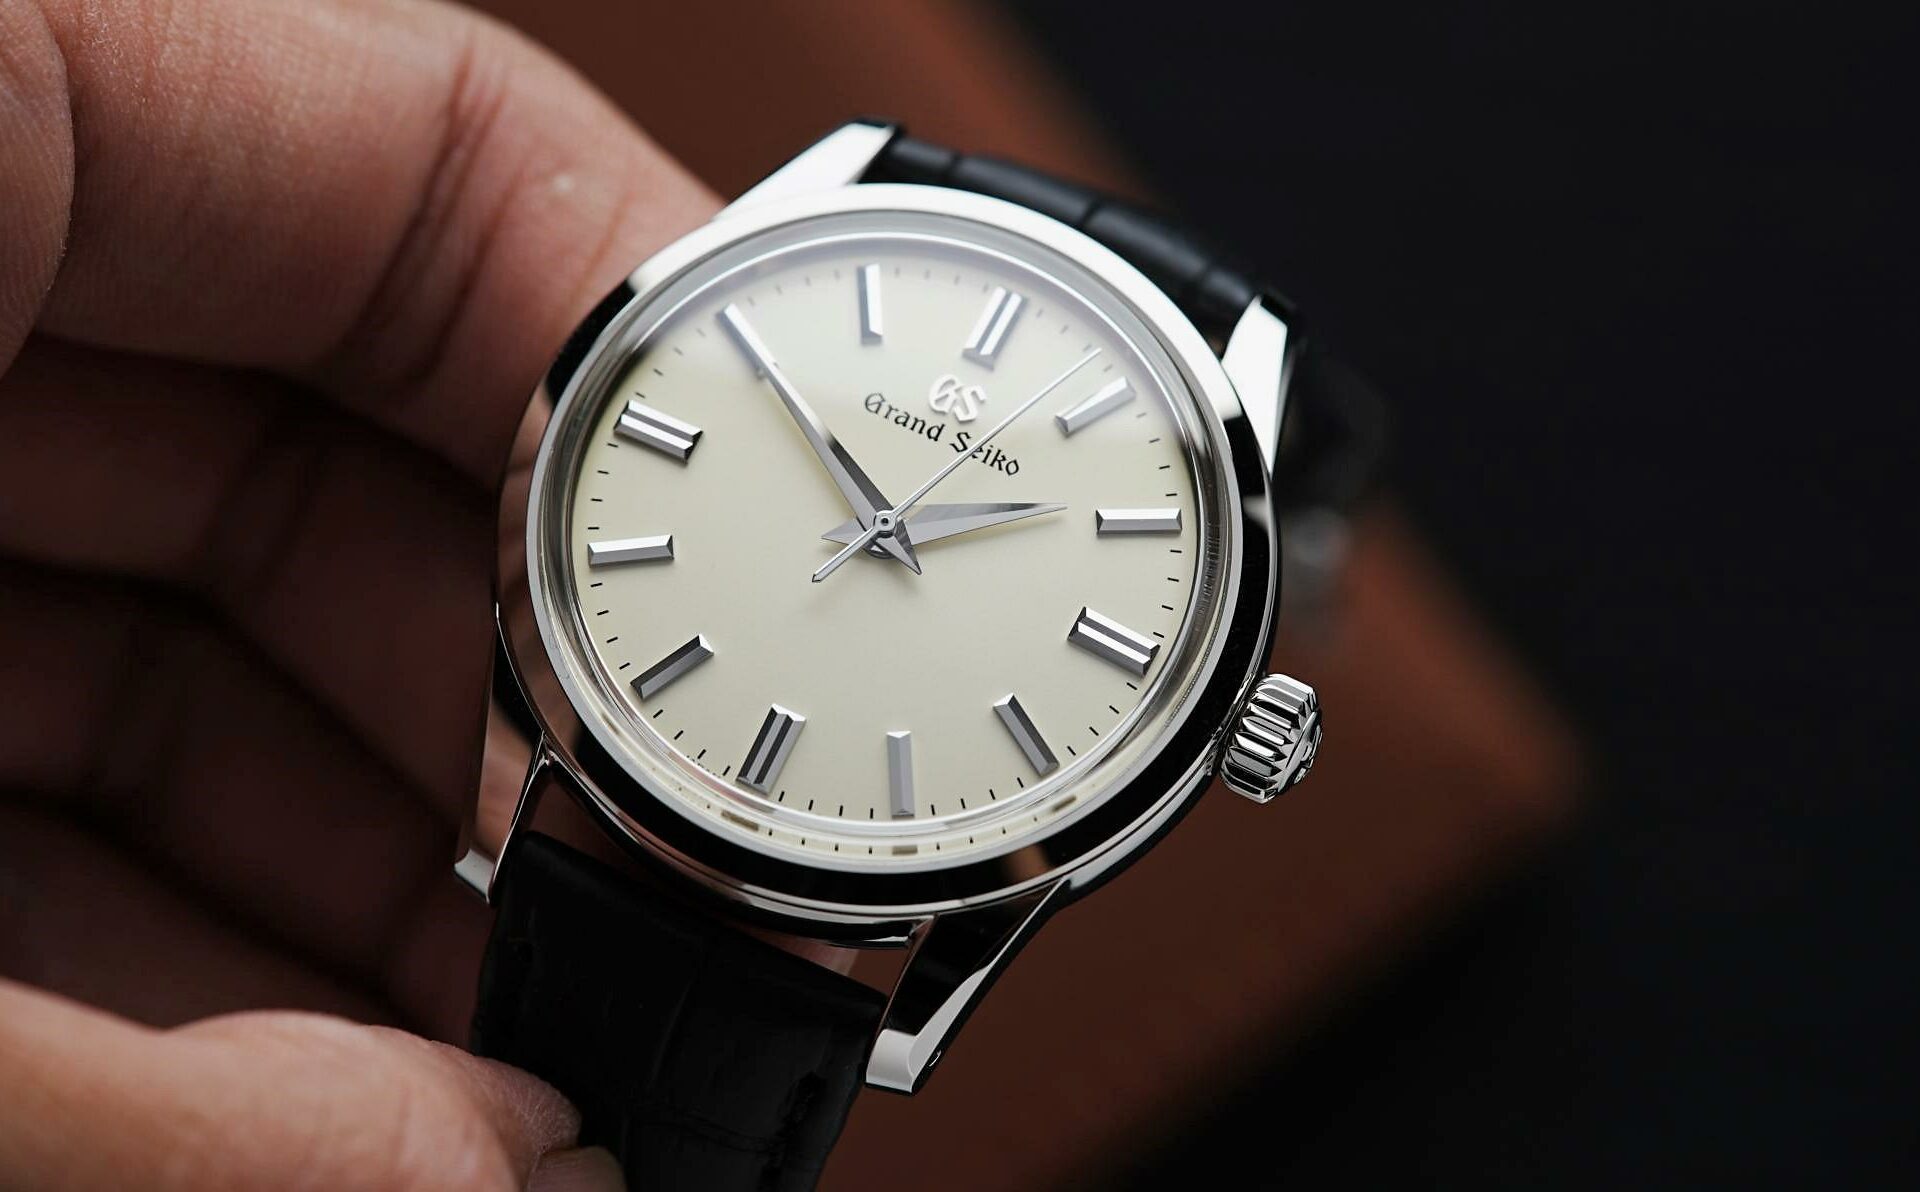 Grand Seiko SBGW231 being held in hand.